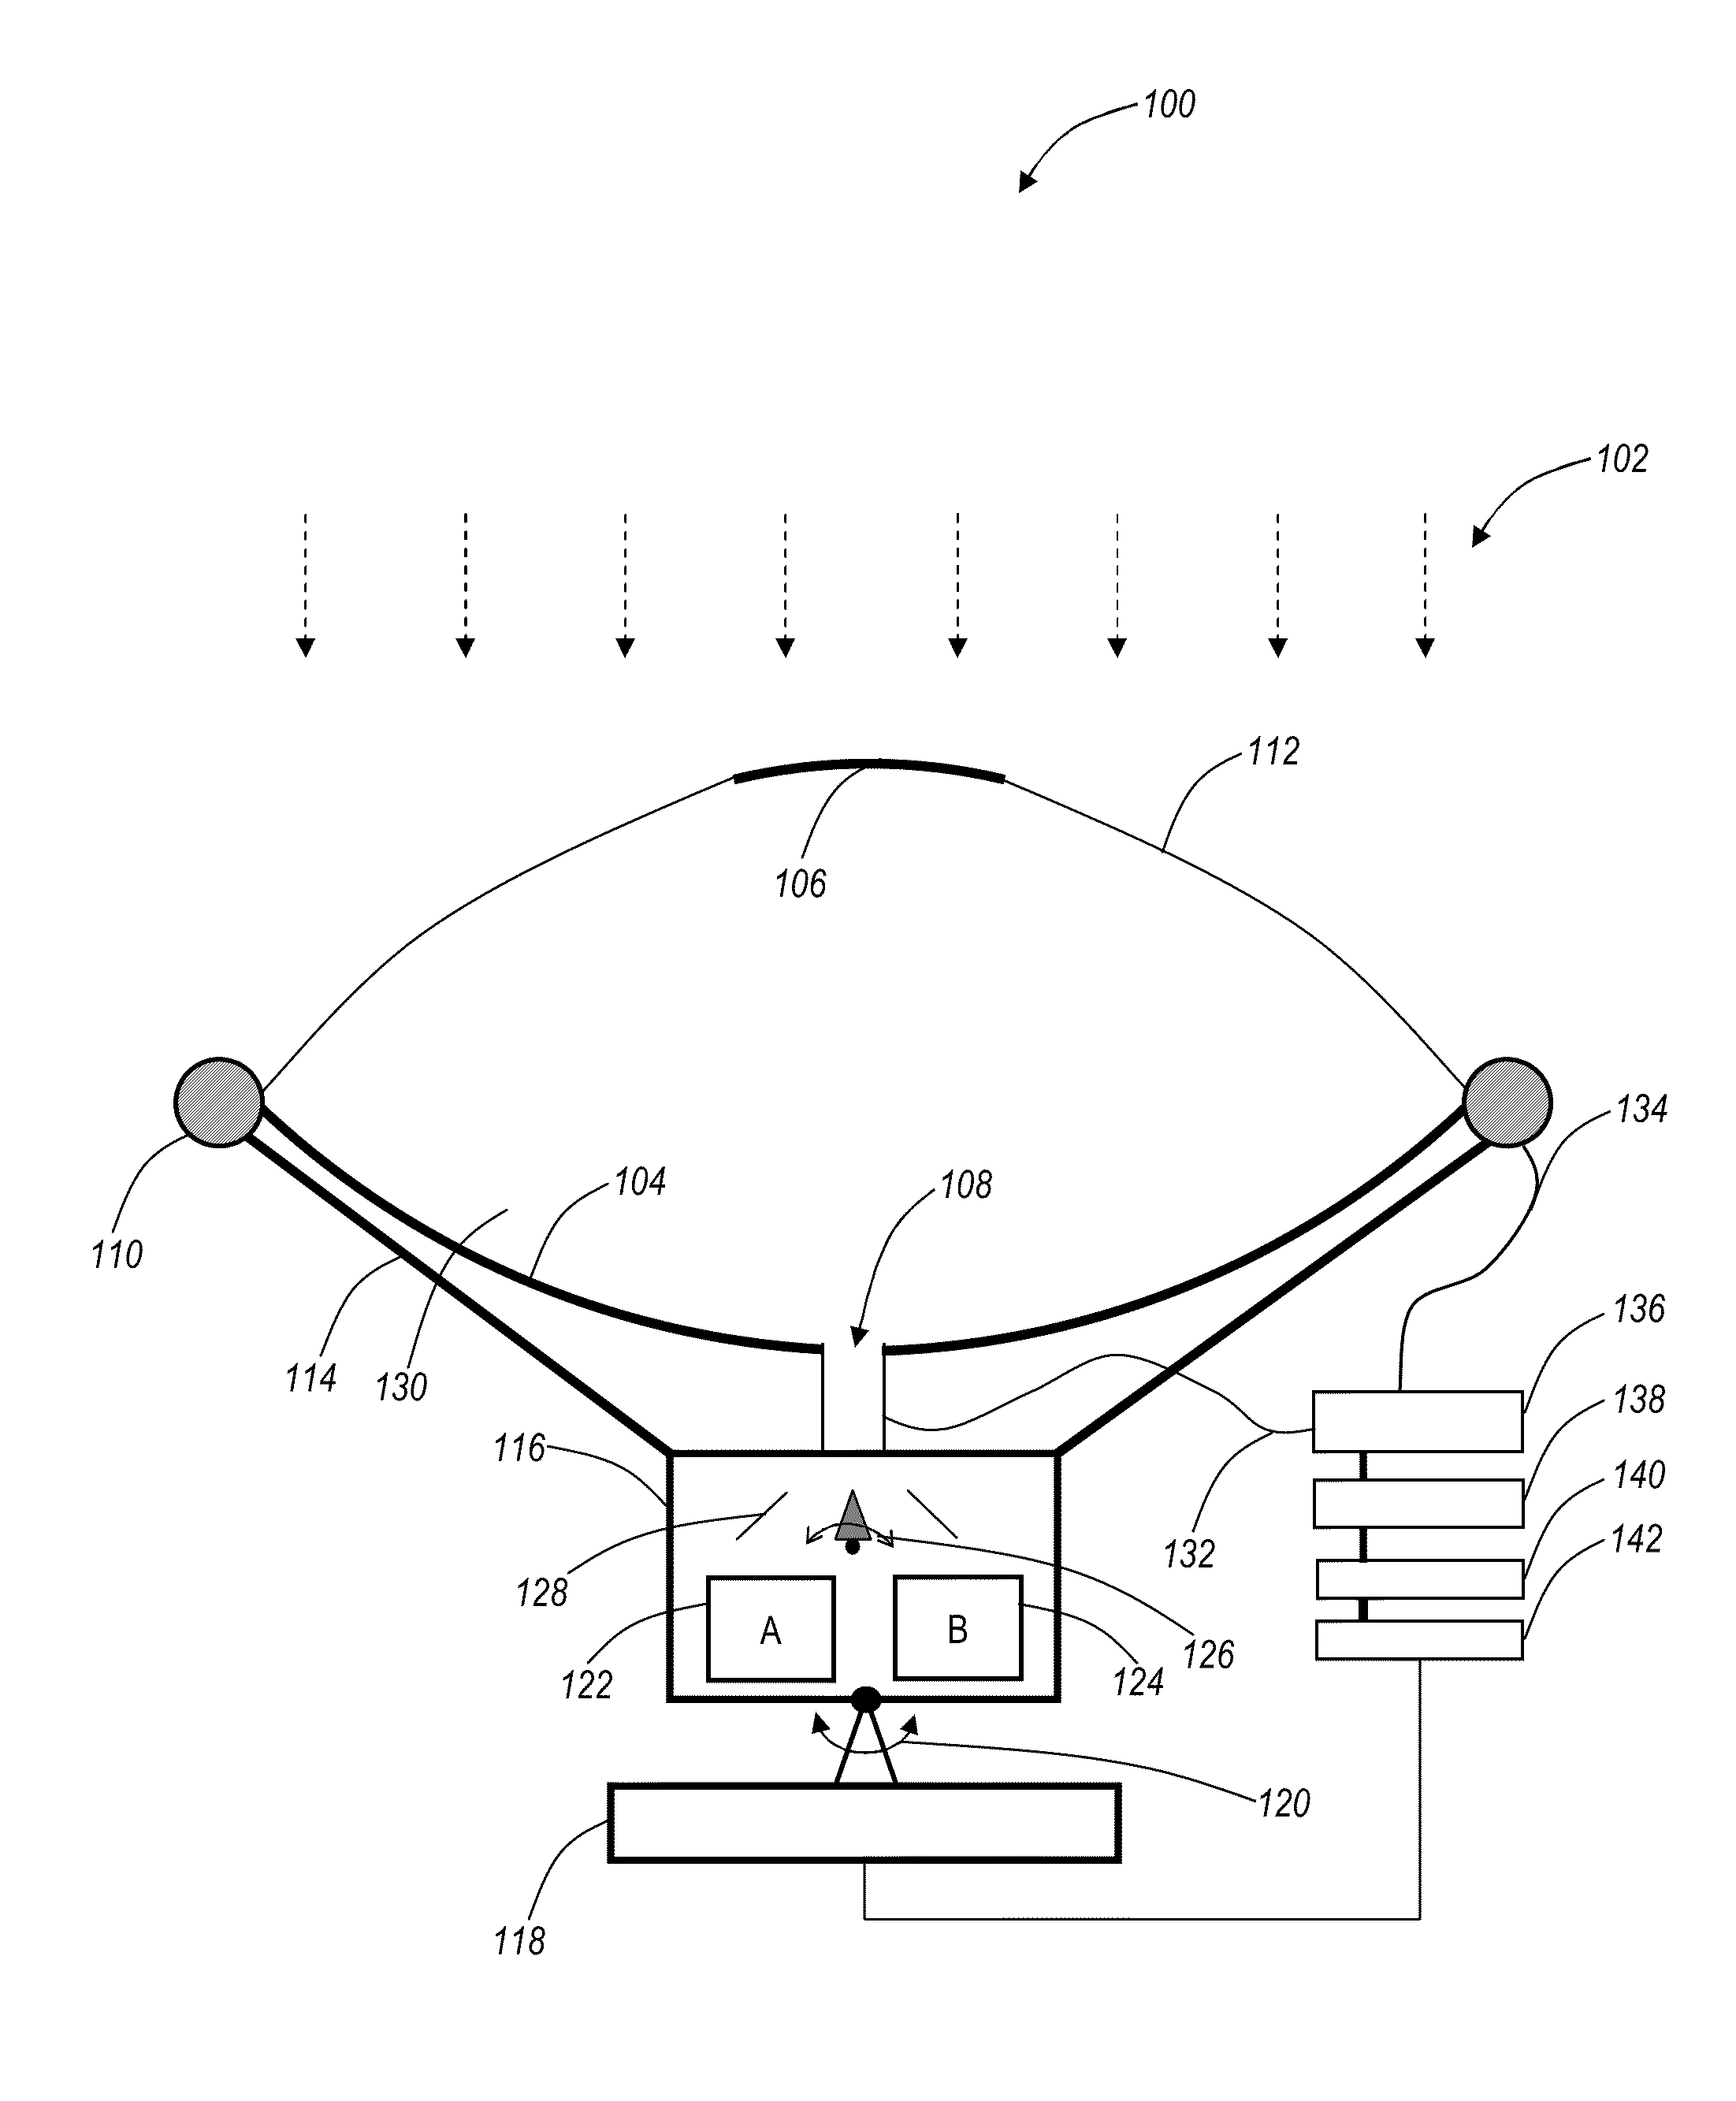 Systems and methods for collecting solar energy for conversion to electrical energy